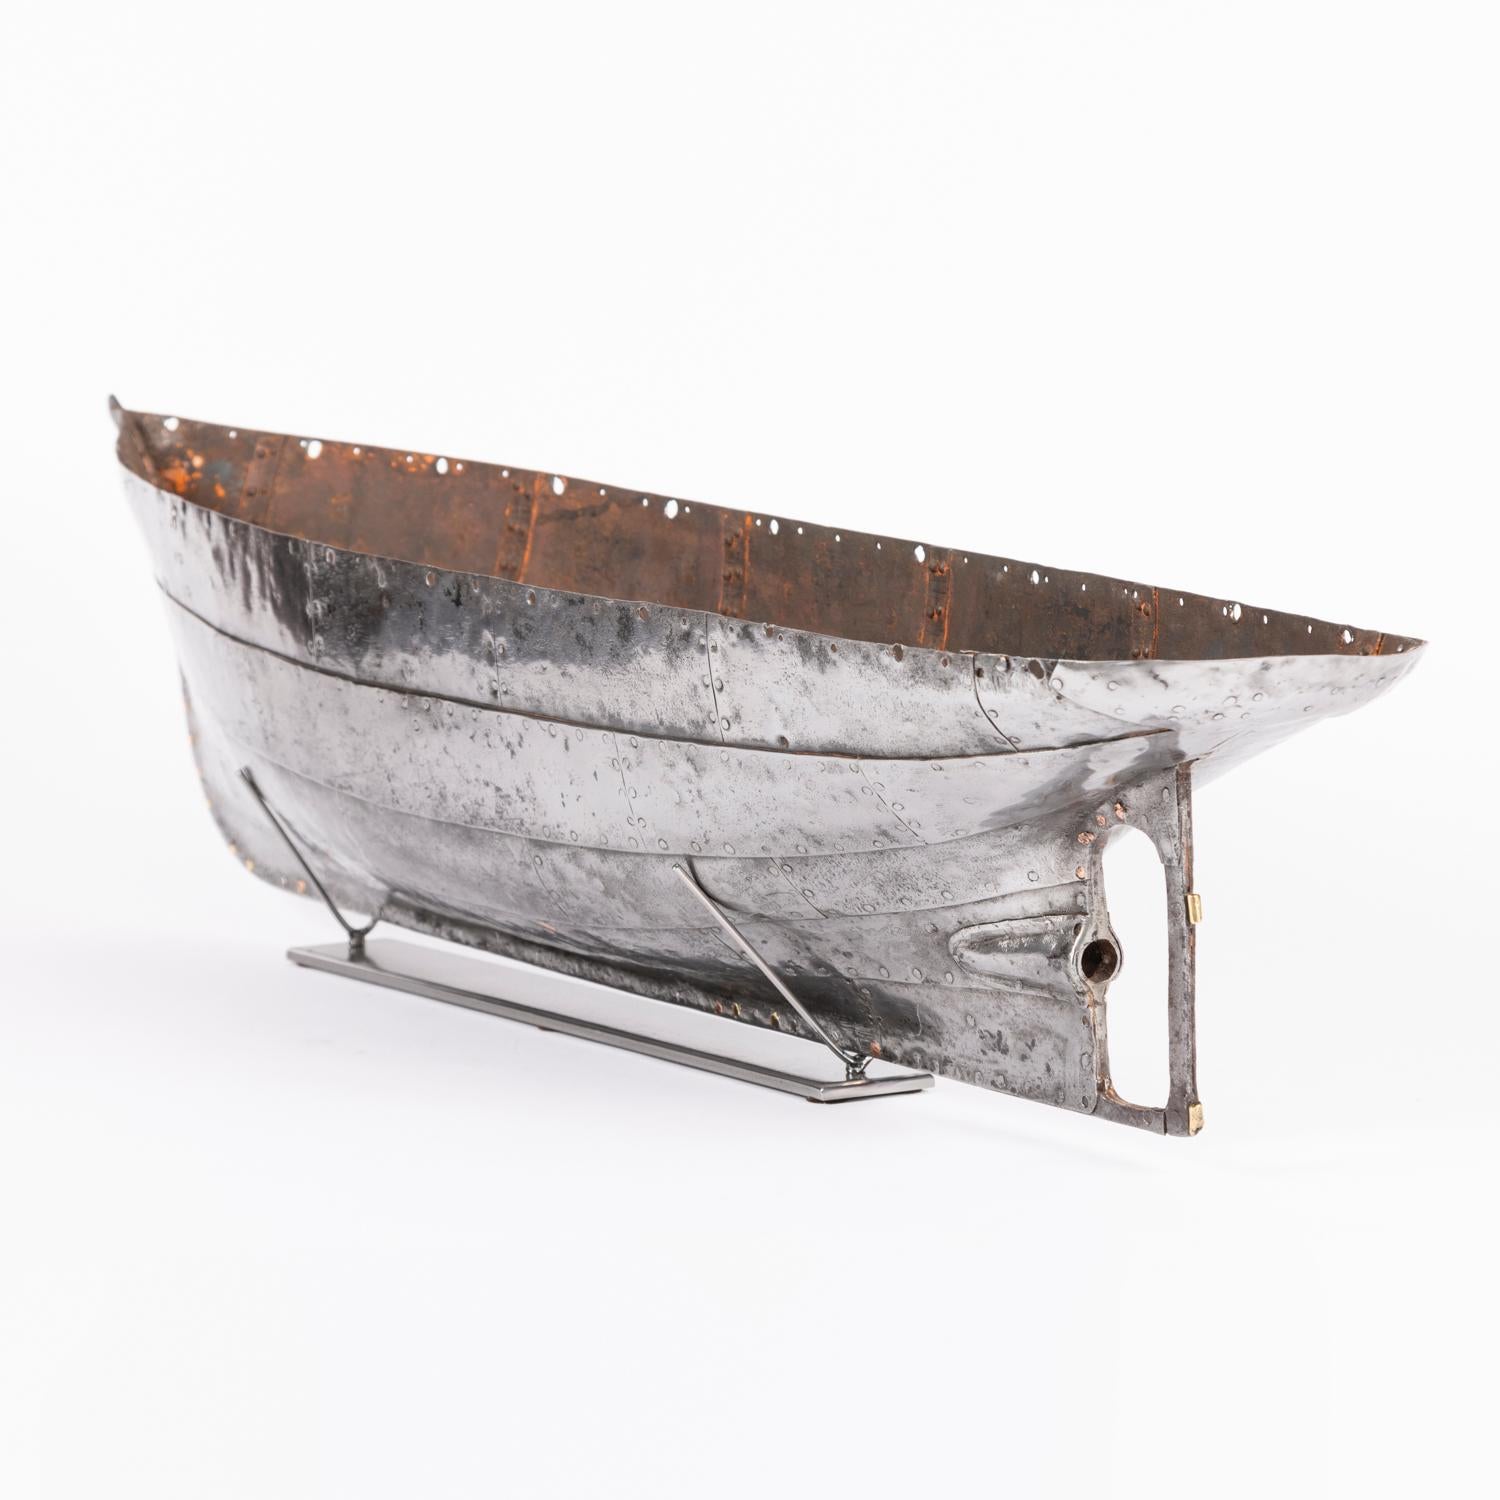 A mid 19th century riveted steel plate hull of a model steam yacht.

Mounted on a later display stand.